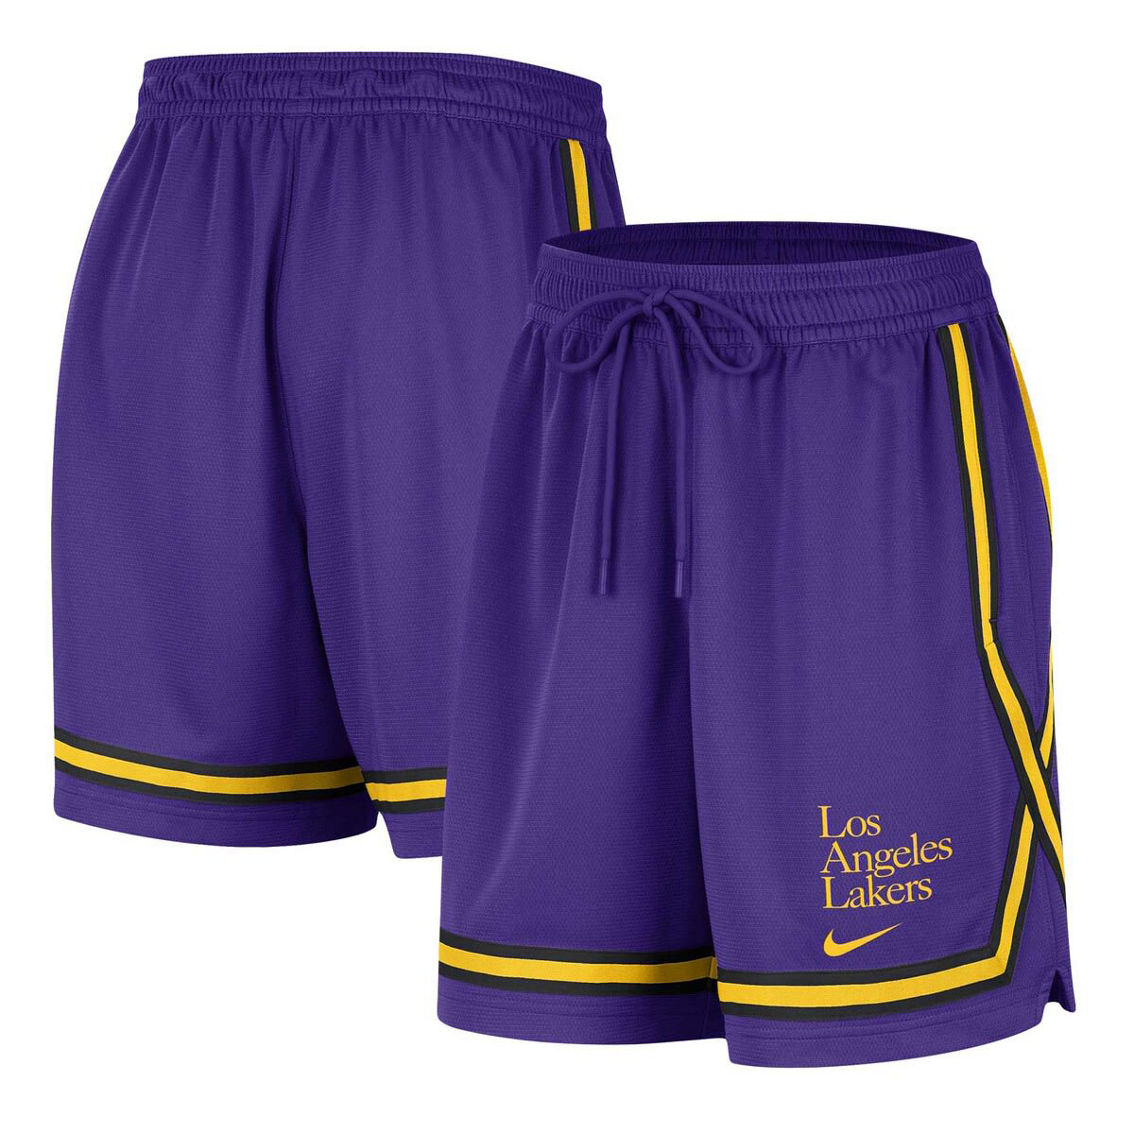 Nike Women's Purple Los Angeles Lakers Authentic Crossover Fly Performance Shorts - Image 2 of 4